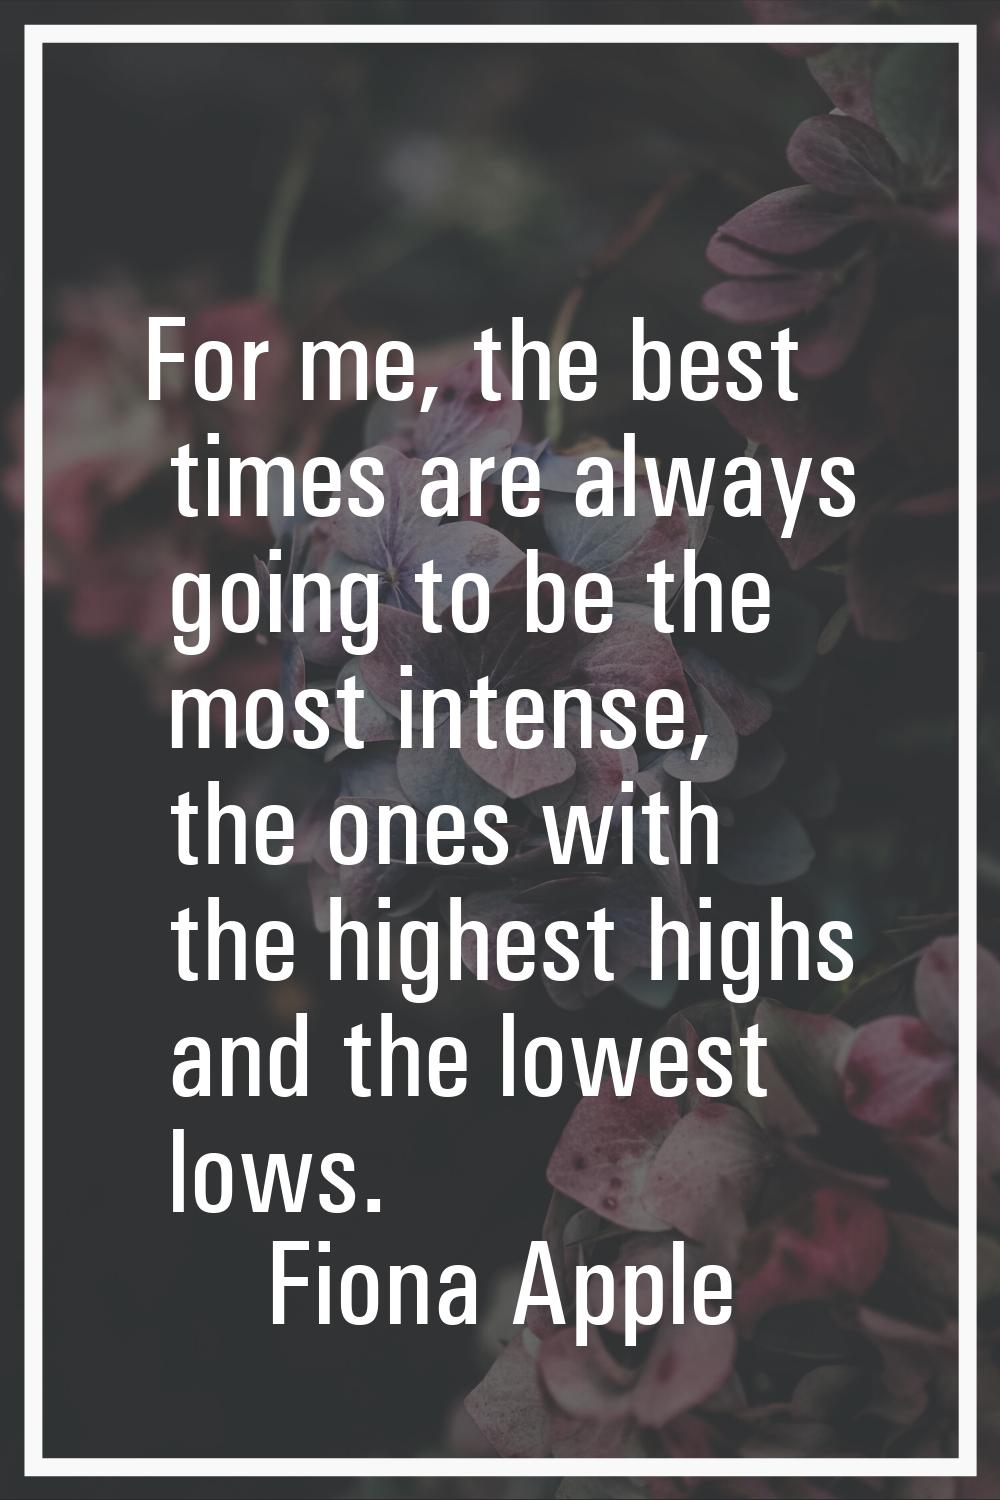 For me, the best times are always going to be the most intense, the ones with the highest highs and